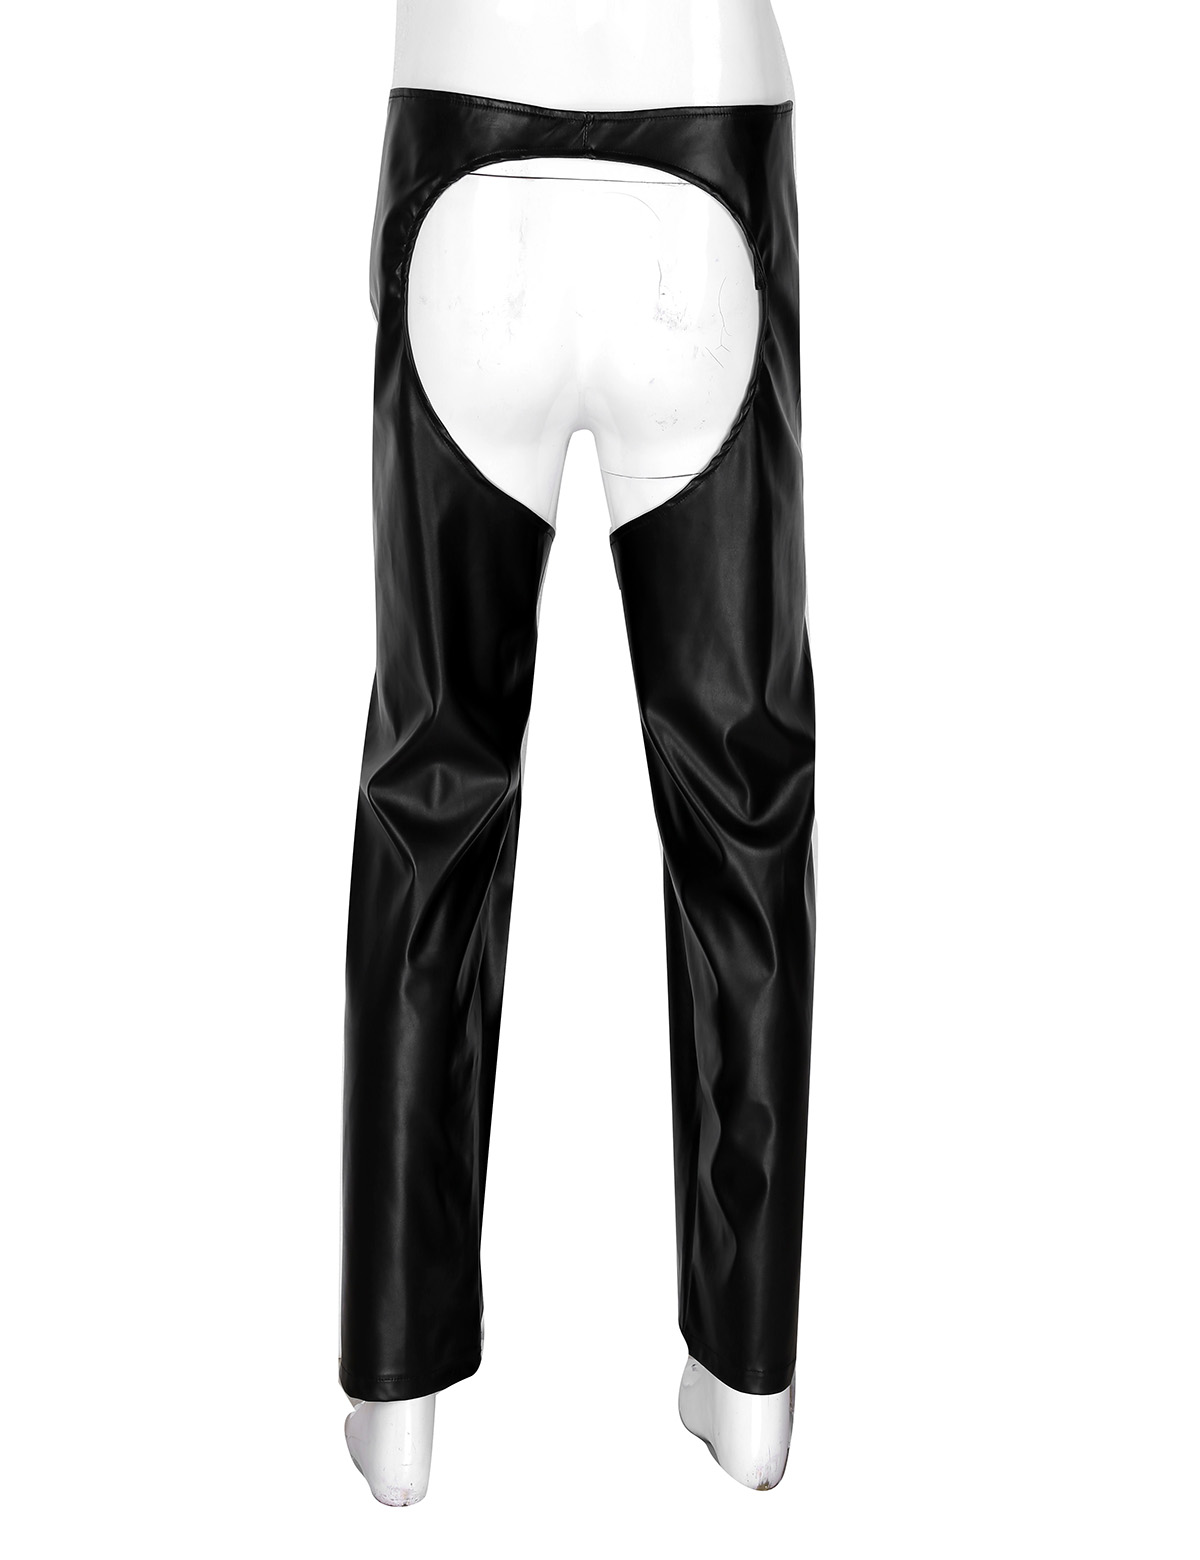 Mens Lingerie Sexy Crotchless Pants Wild West Cowboy Leather Chaps with Fringed Details Sex Costume Buckled Loose Long Pants